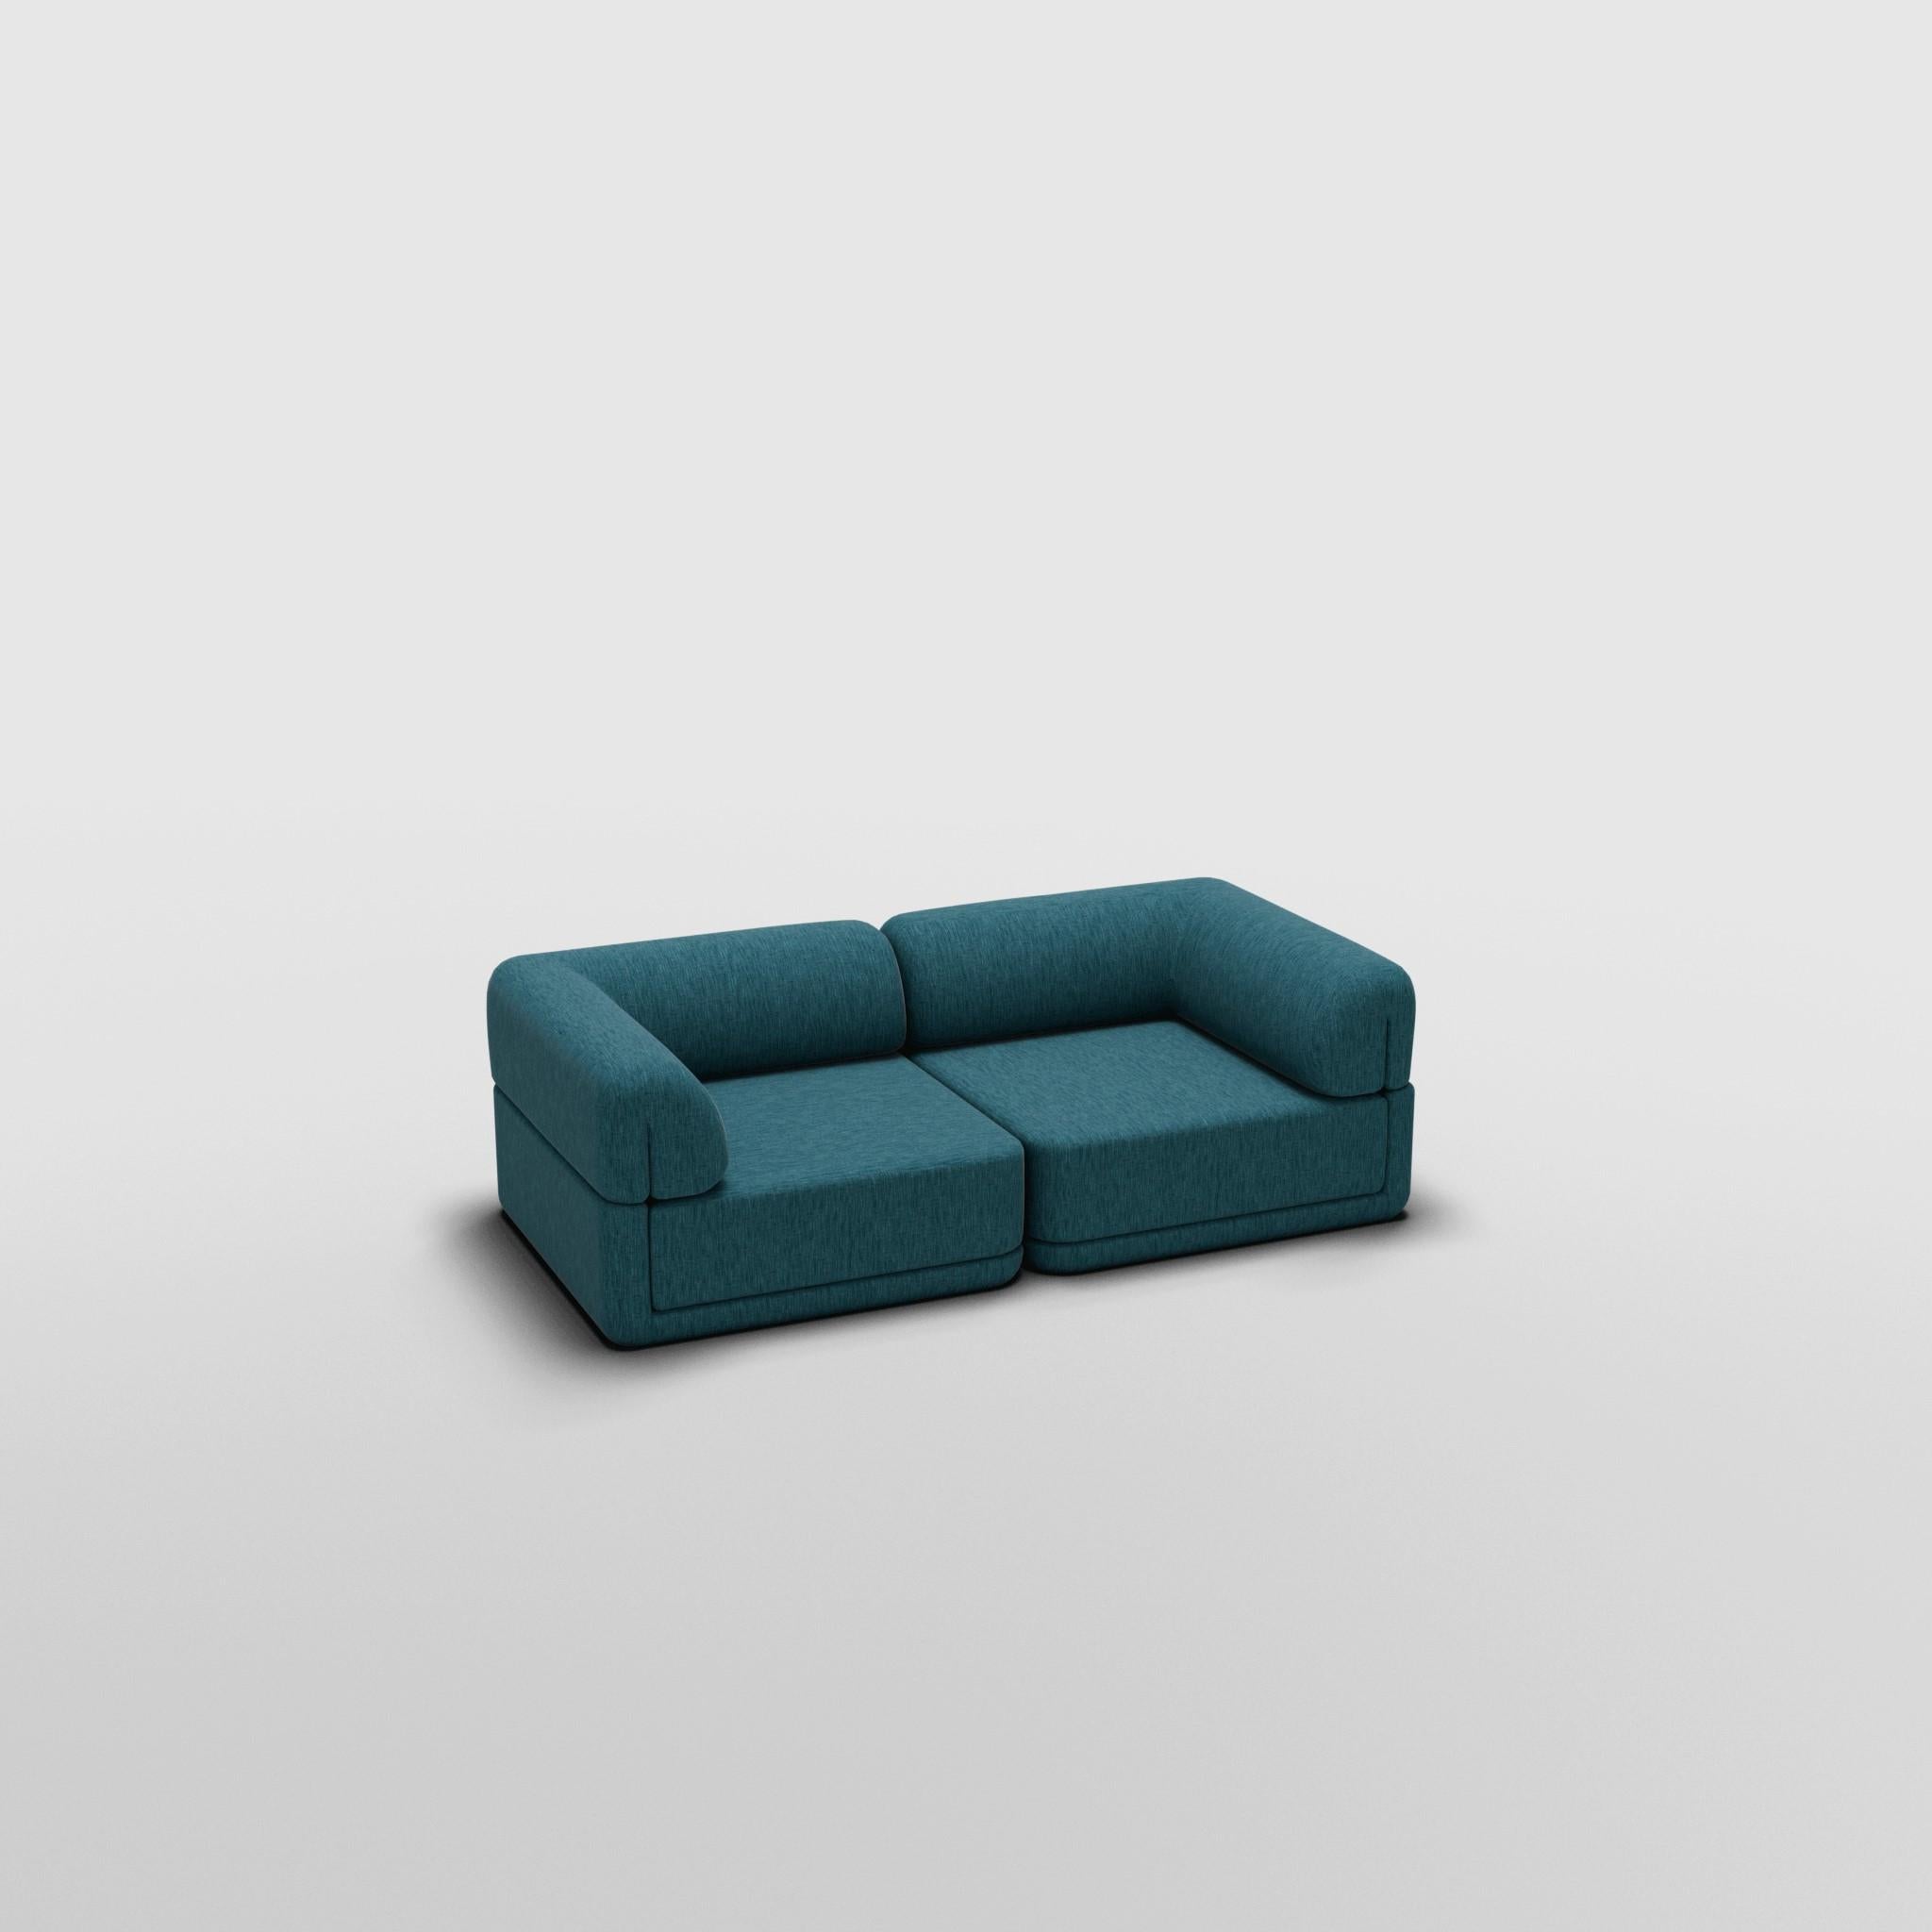 Corner Lounge Set - Inspired by 70s Italian Luxury Furniture

Discover The Cube Sofa, where art meets adaptability. Its sculptural design and customizable comfort create endless possibilities for your living space. Make a statement, elevate your